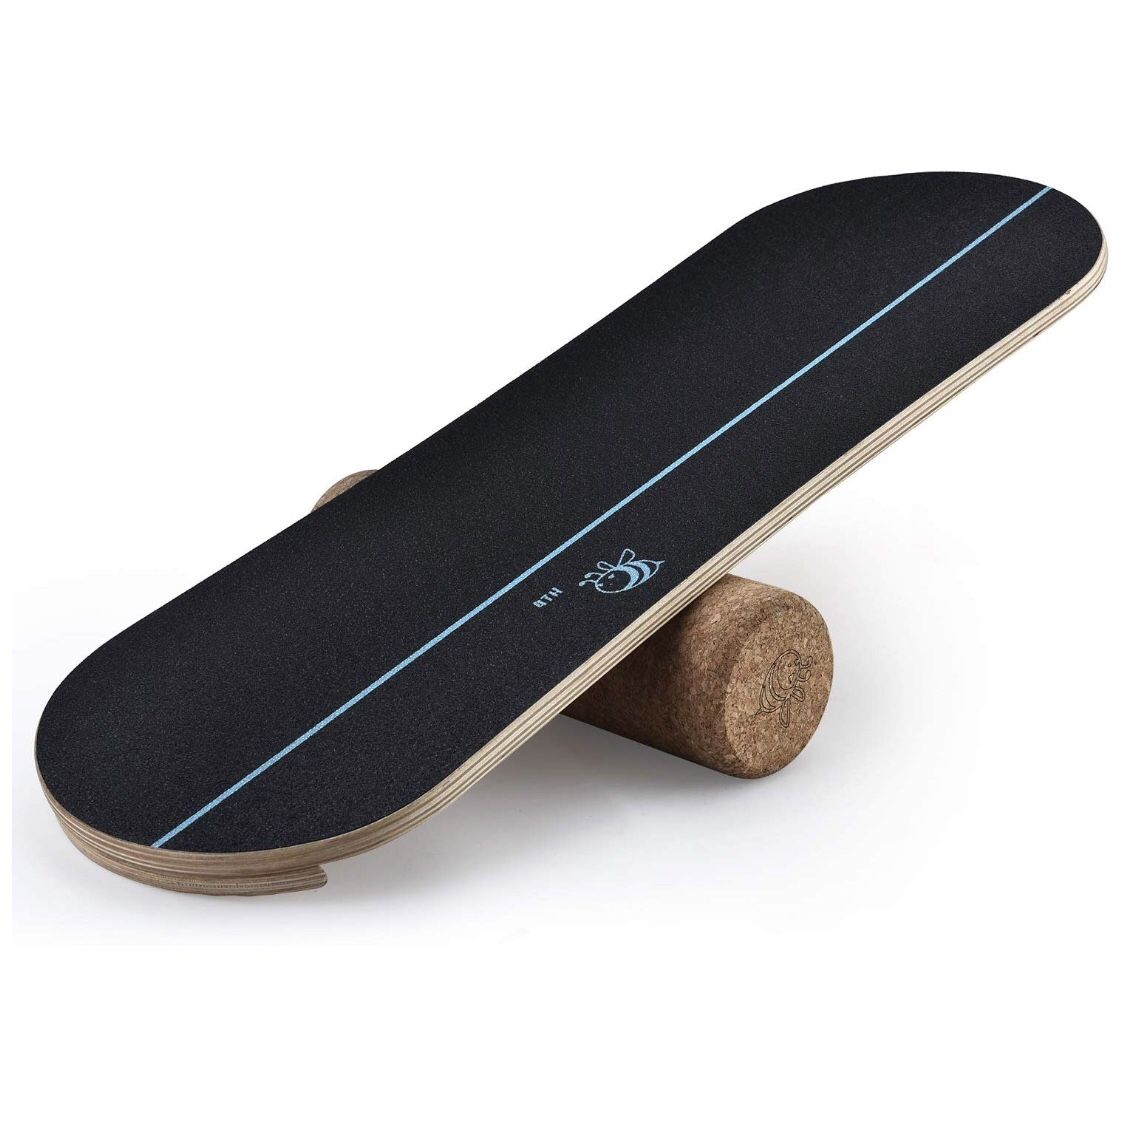 4TH Bee Core Balance Board for Exercise Training-Board Exercise for Fitness with Roller- Board Balancing for Surf,Ski, Snowboard and Skateboarding.